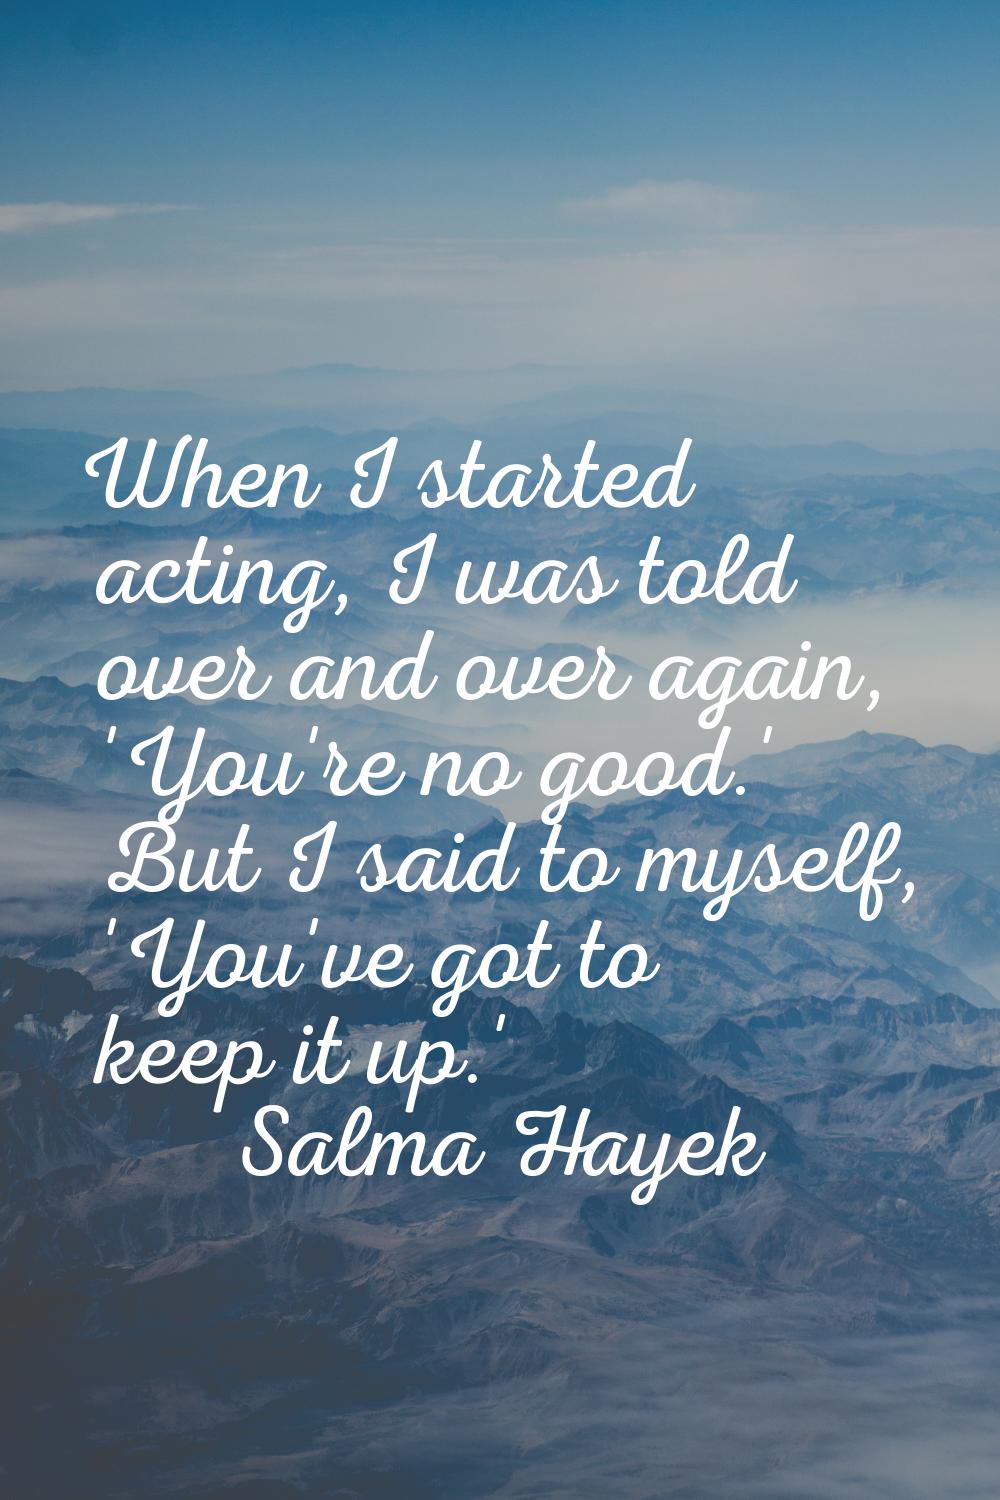 When I started acting, I was told over and over again, 'You're no good.' But I said to myself, 'You